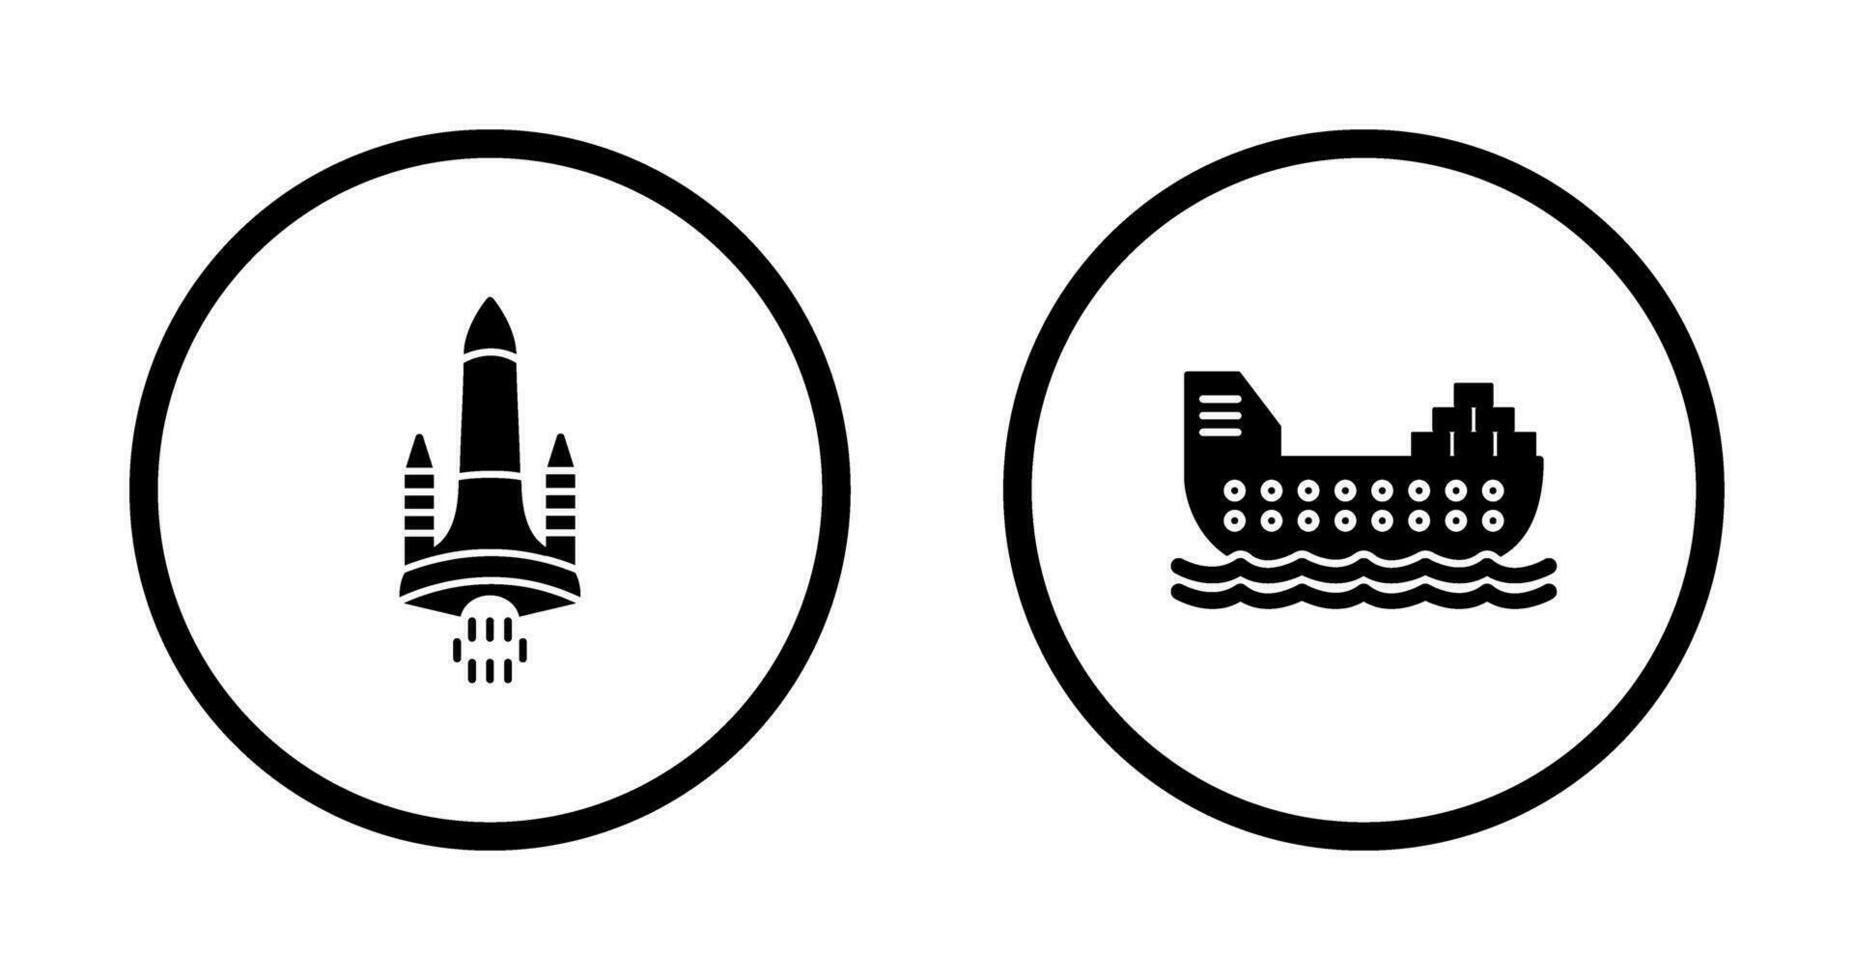 Space Shuttle and Cargo Icon vector